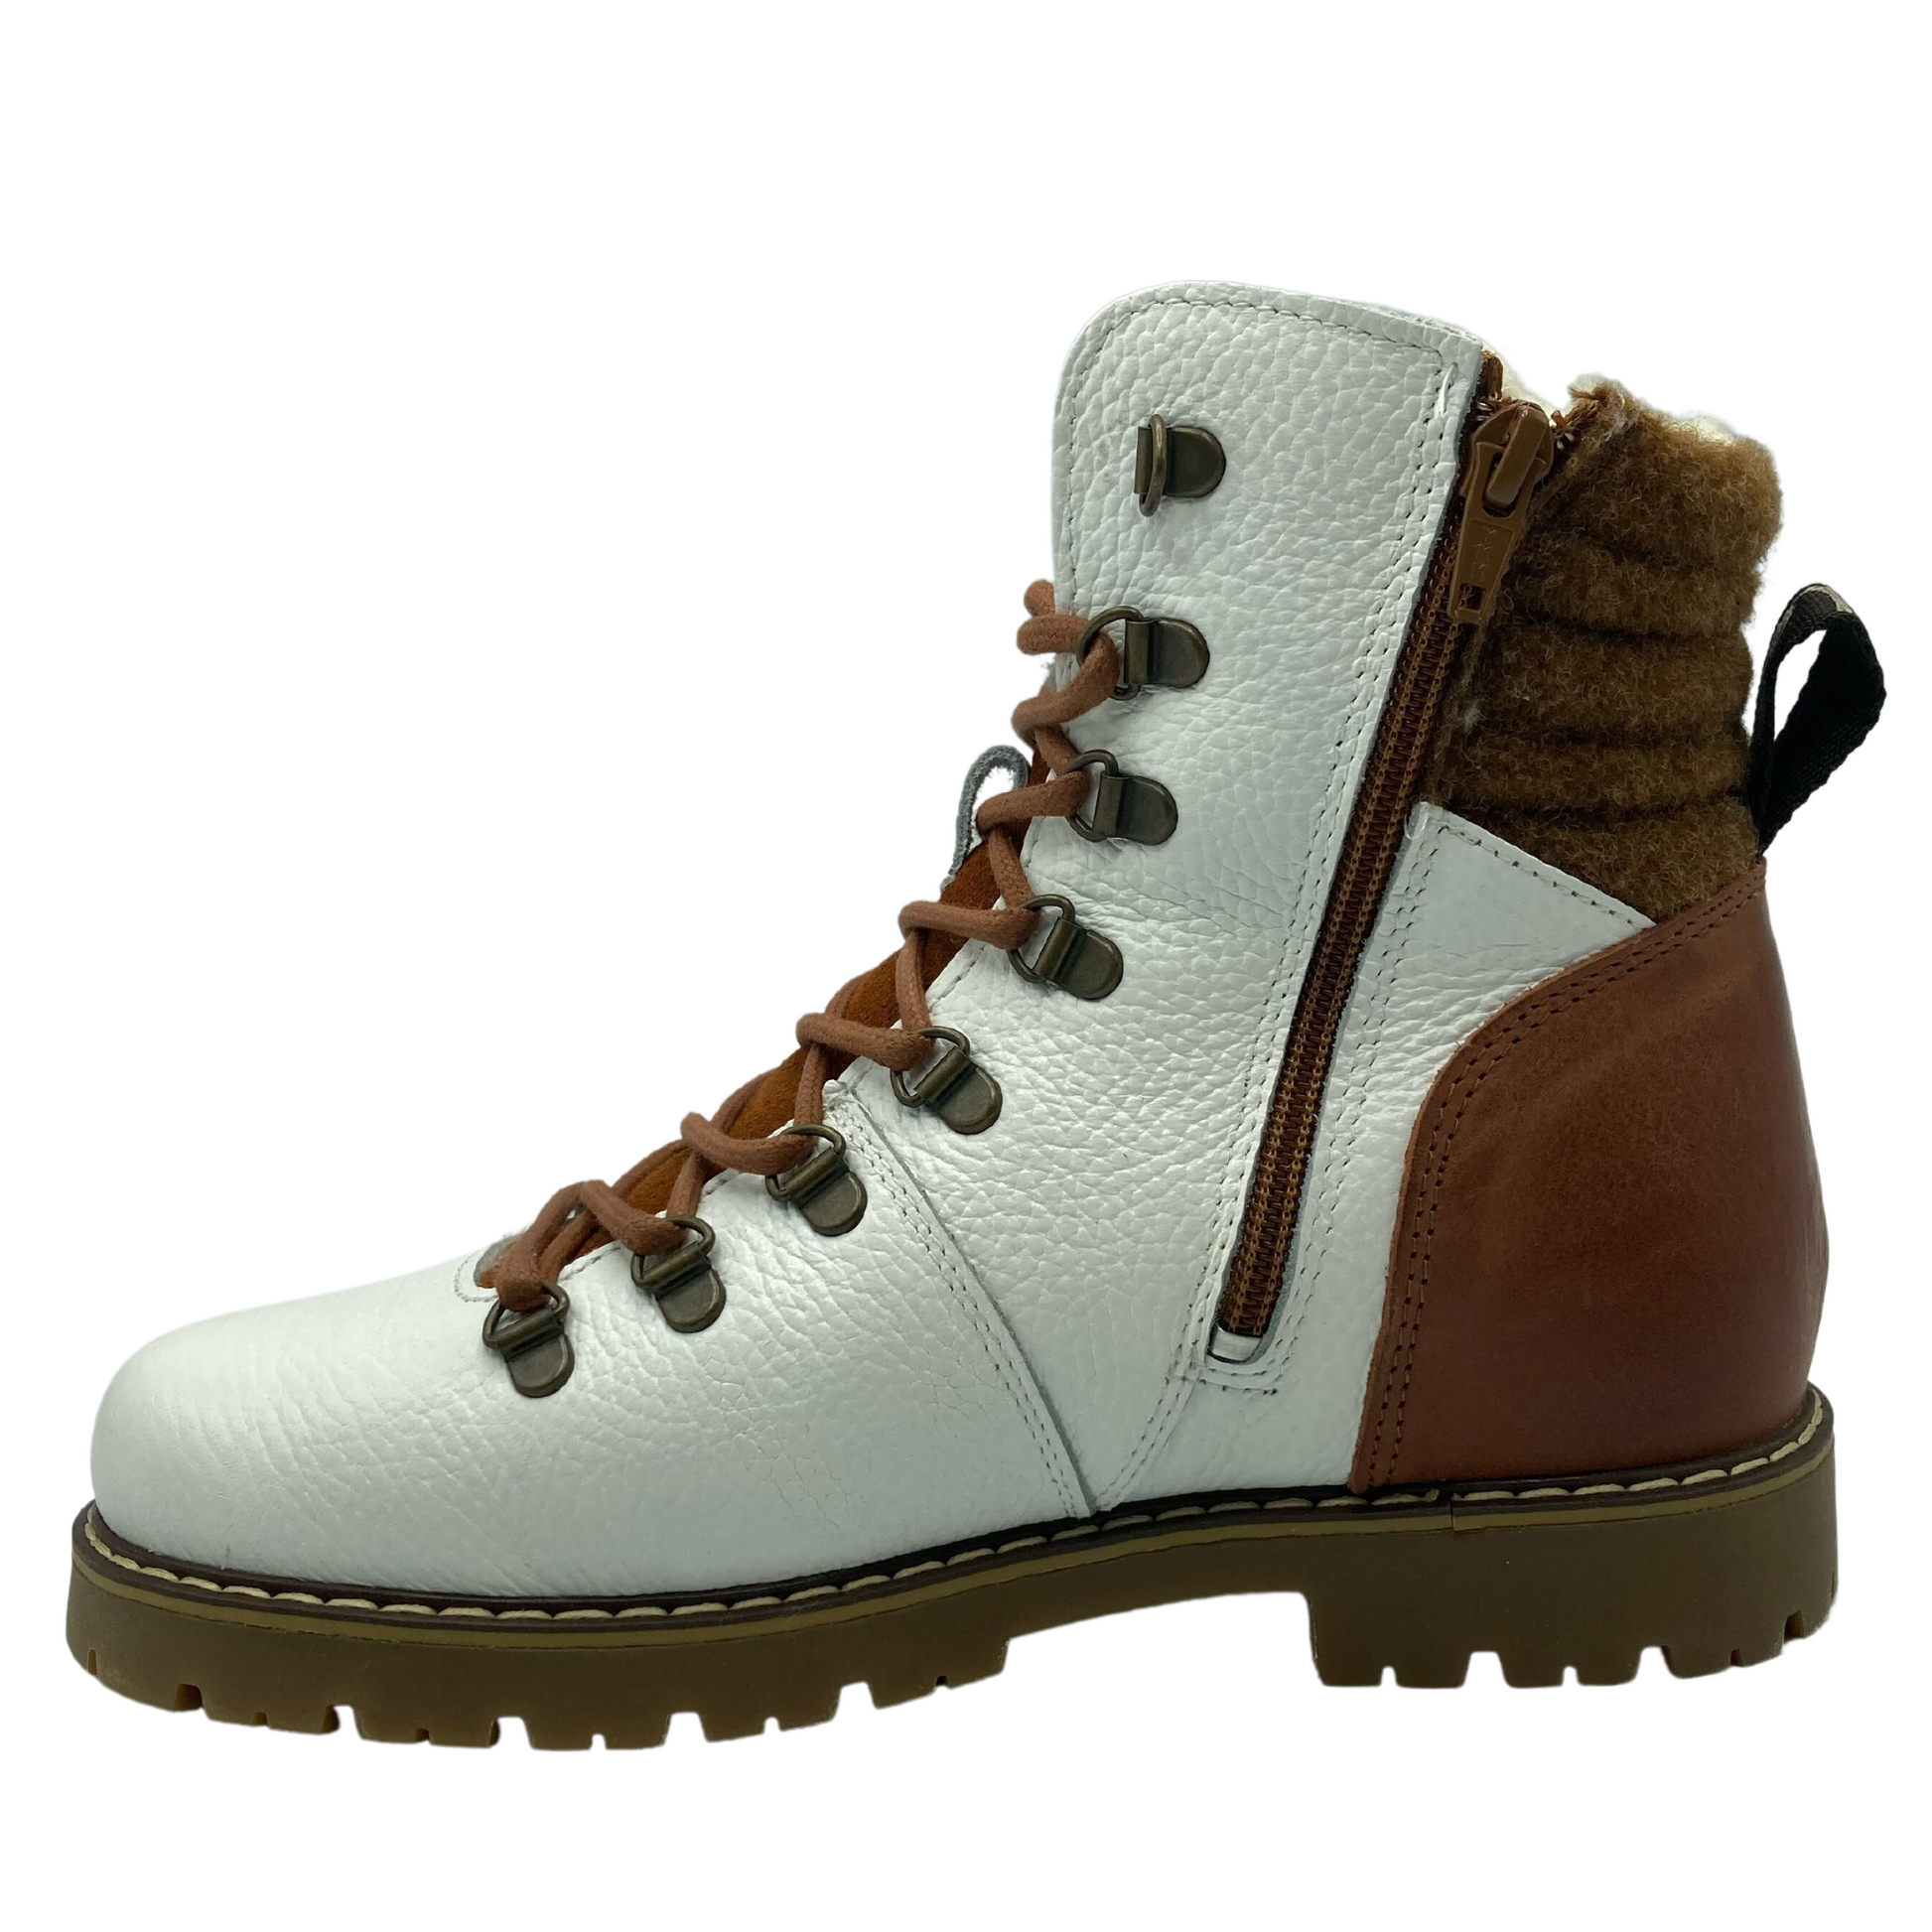 Left facing view of white leather boot with wool ankle and side zipper closure